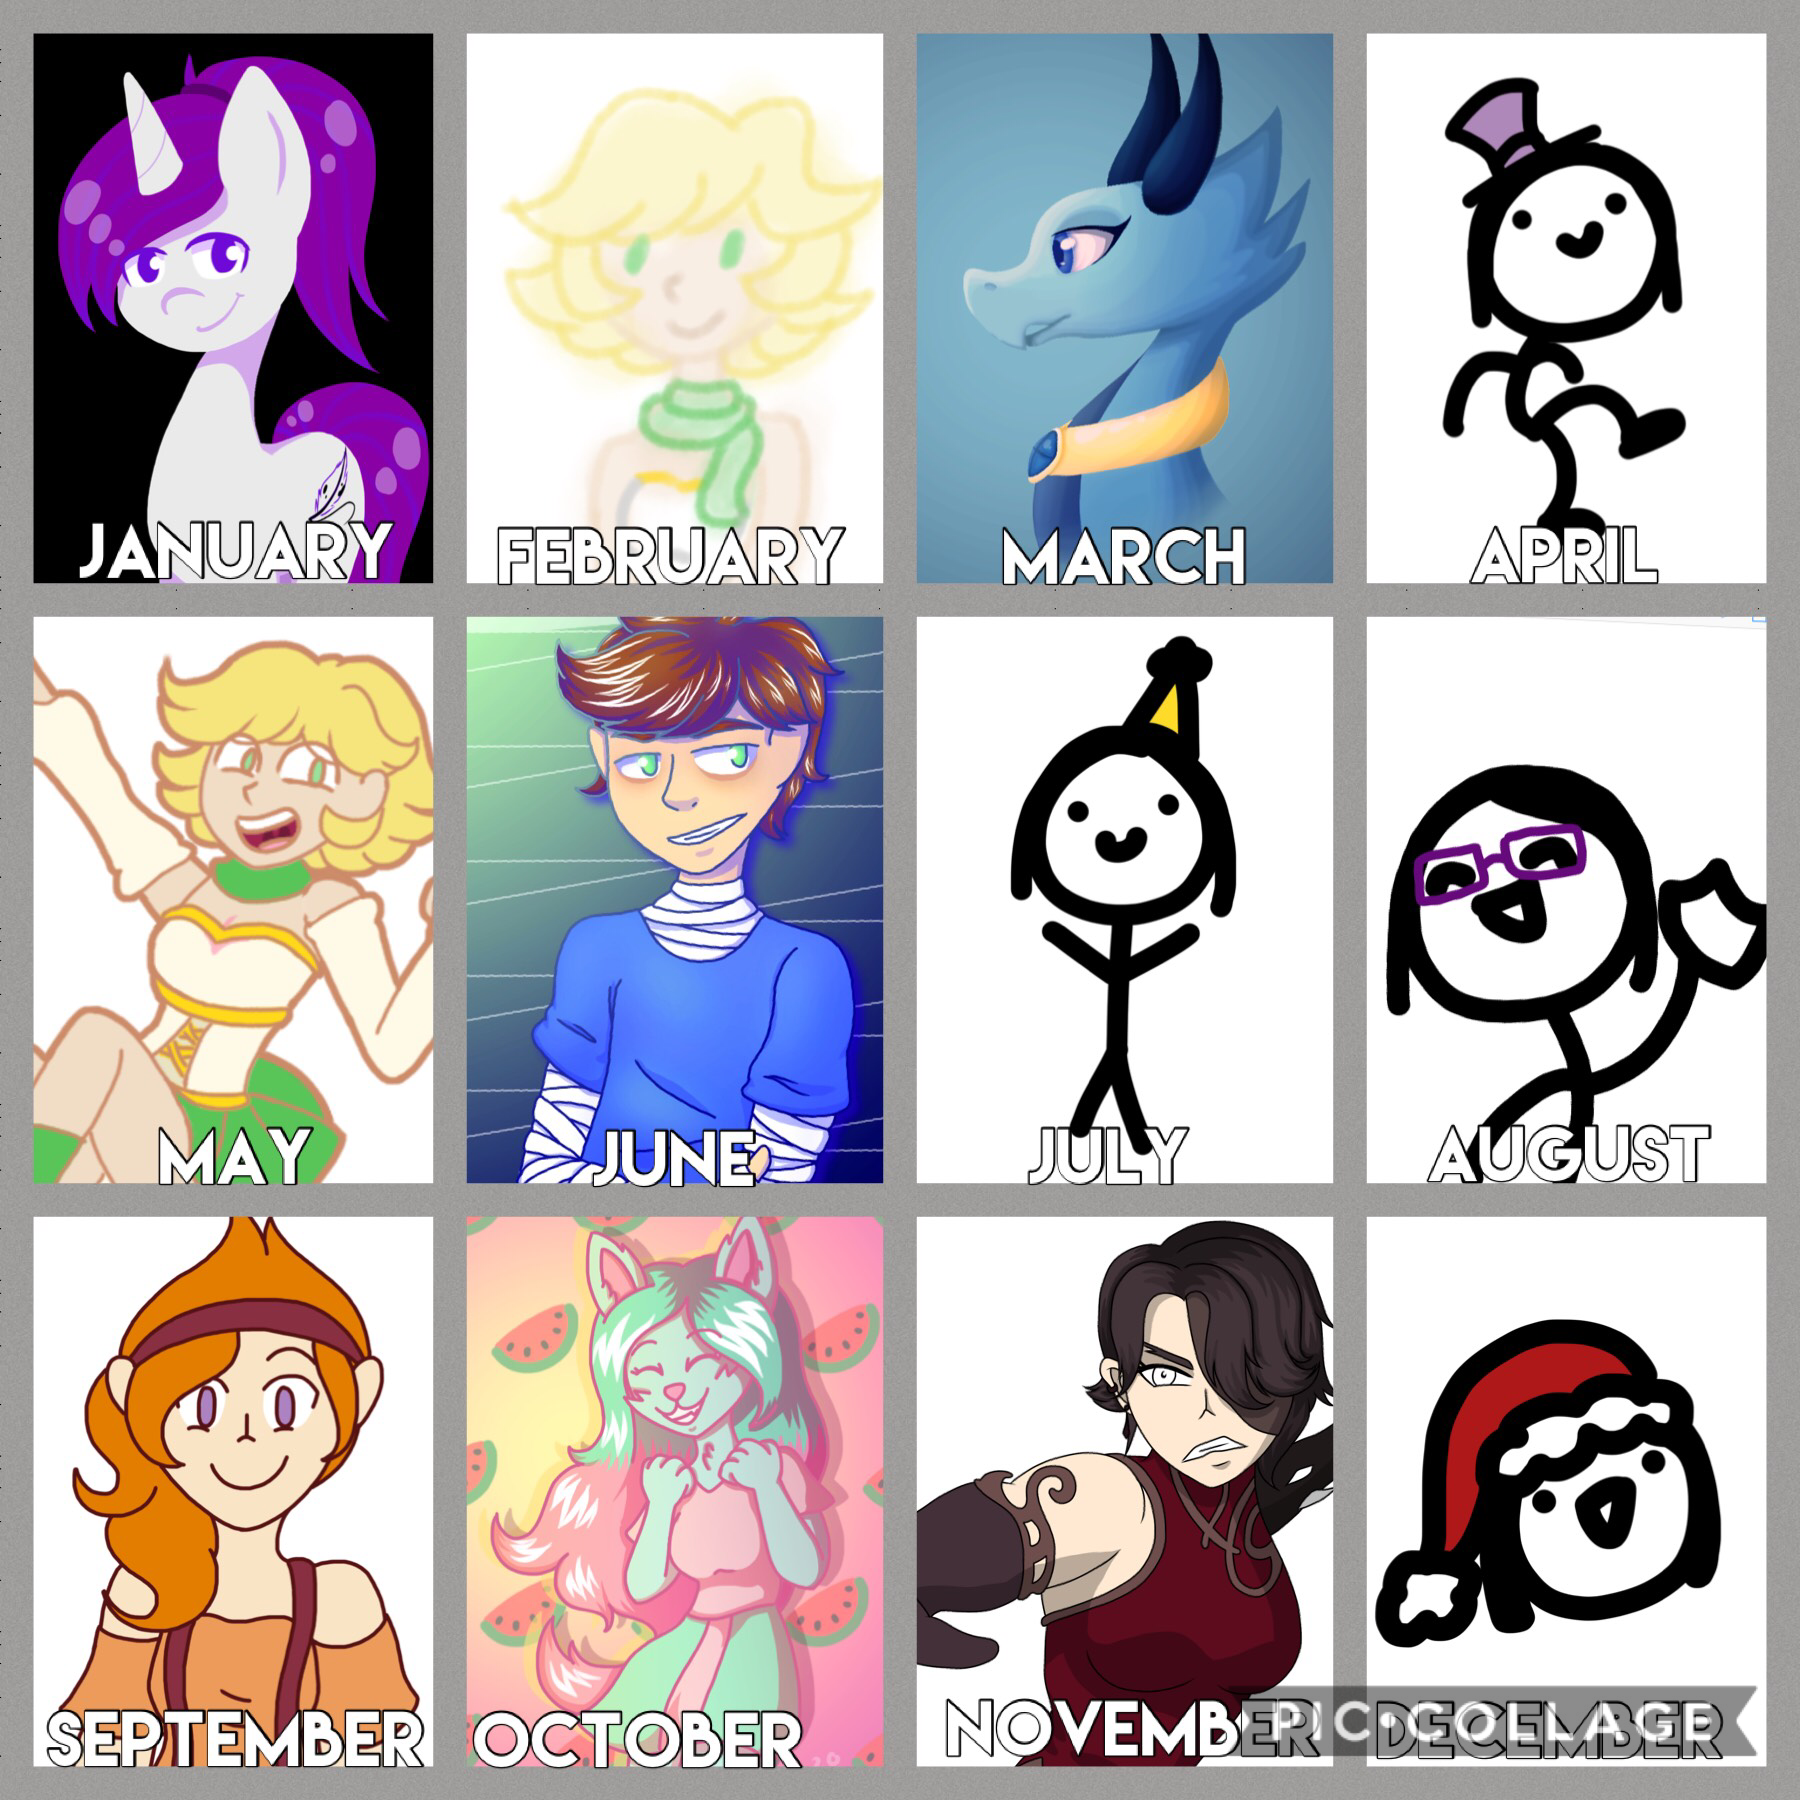 Tap
Consistently Inconsistent :3
You can probably tell which months I didn’t draw much *cough cough* april, july, and august
Also, I never shared my May drawing and never finished the November one